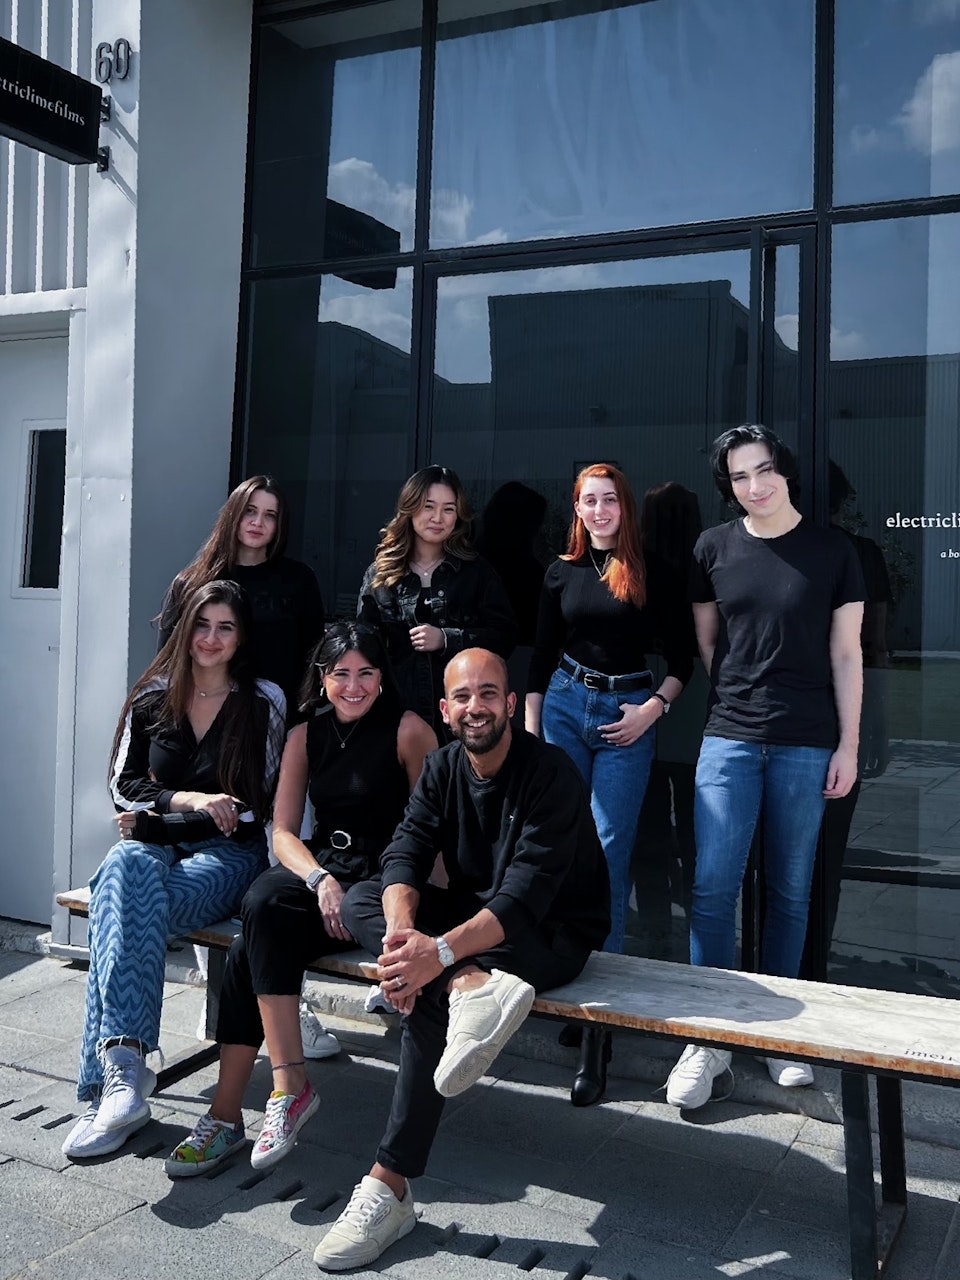 electriclime° - Meet The Team | electriclime° welcomes new starters to Dubai office